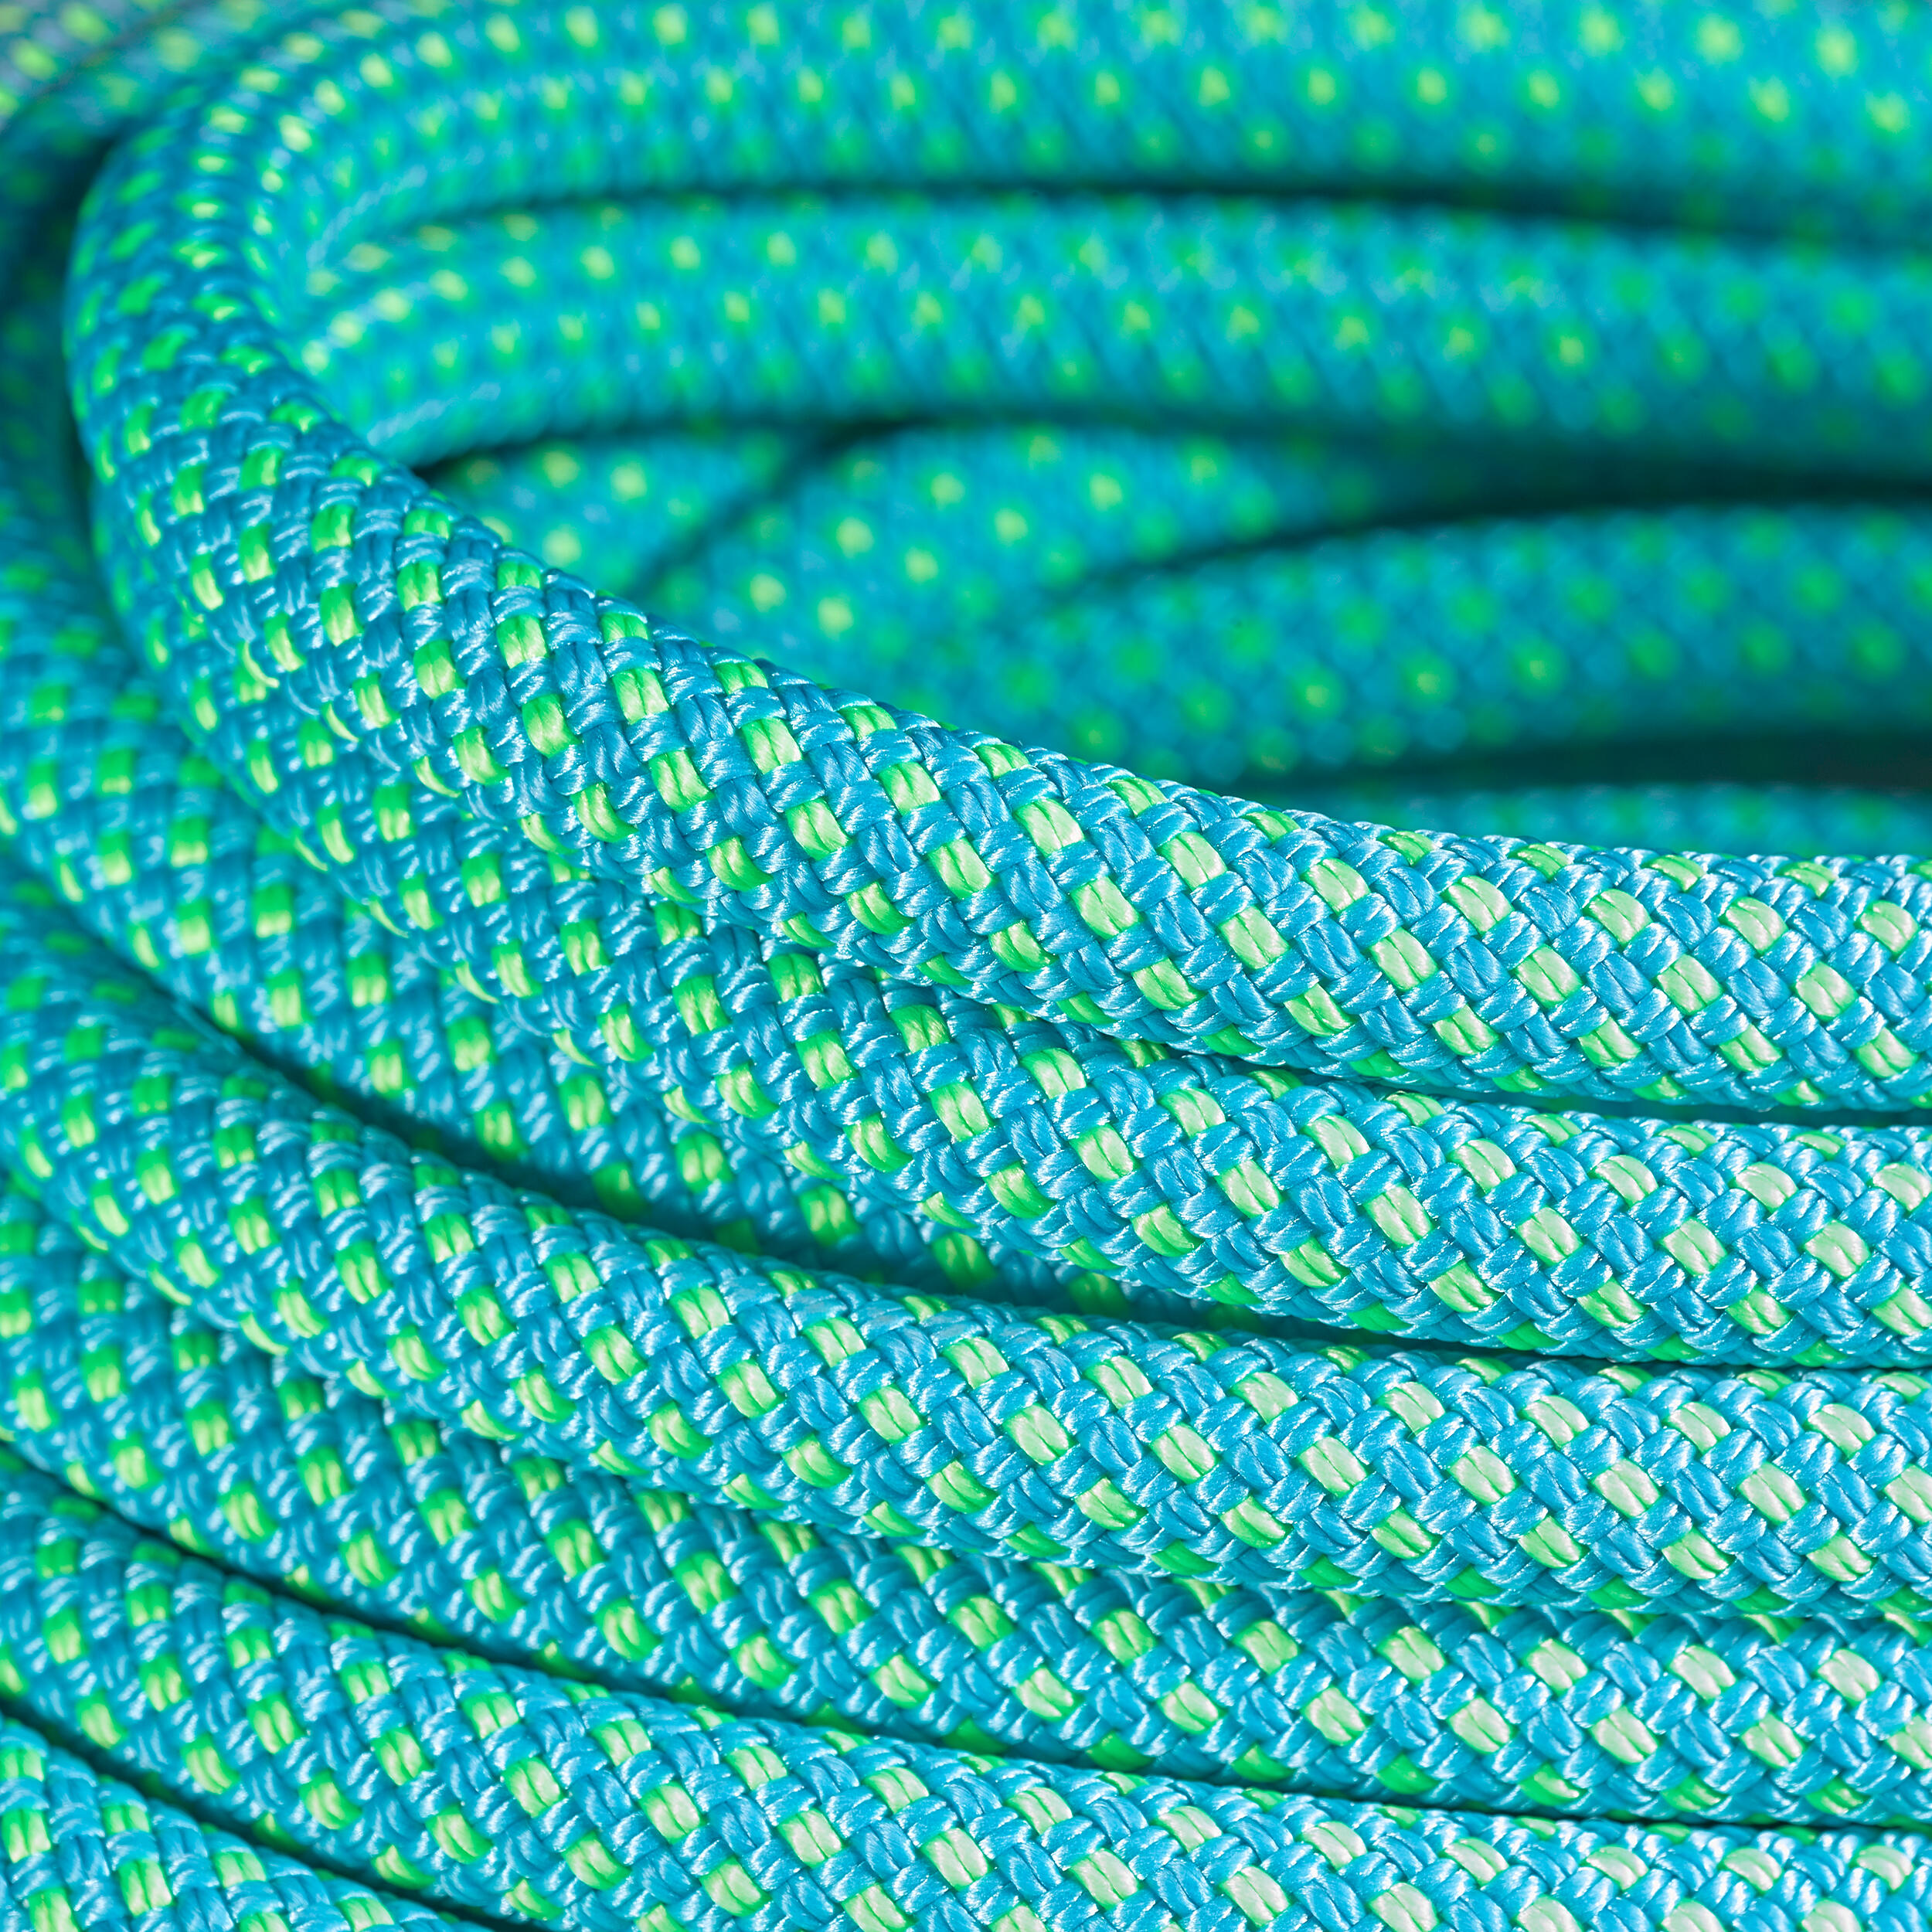 CLIMBING AND MOUNTAINEERING TRIPLE ROPE STANDARD 8.9 mm x 50 m - EDGE DRY TURQUOISE 2/3